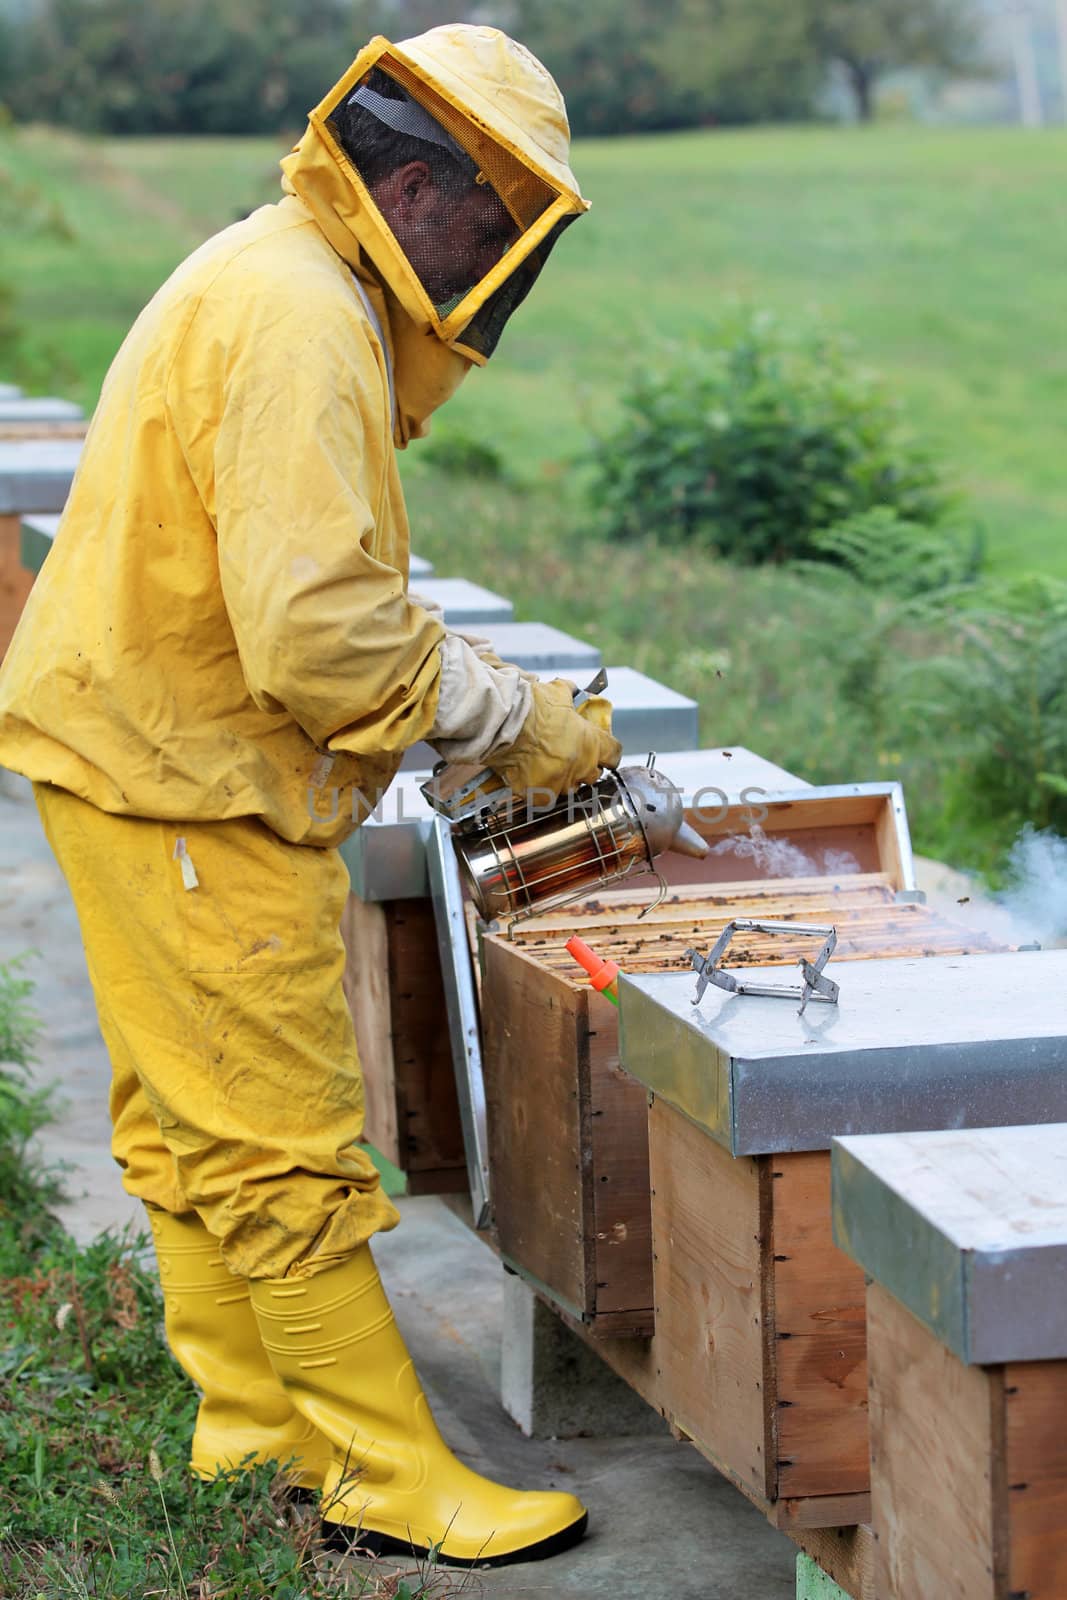 Beekeeper is smoking a beehive. Apiculture and honey.